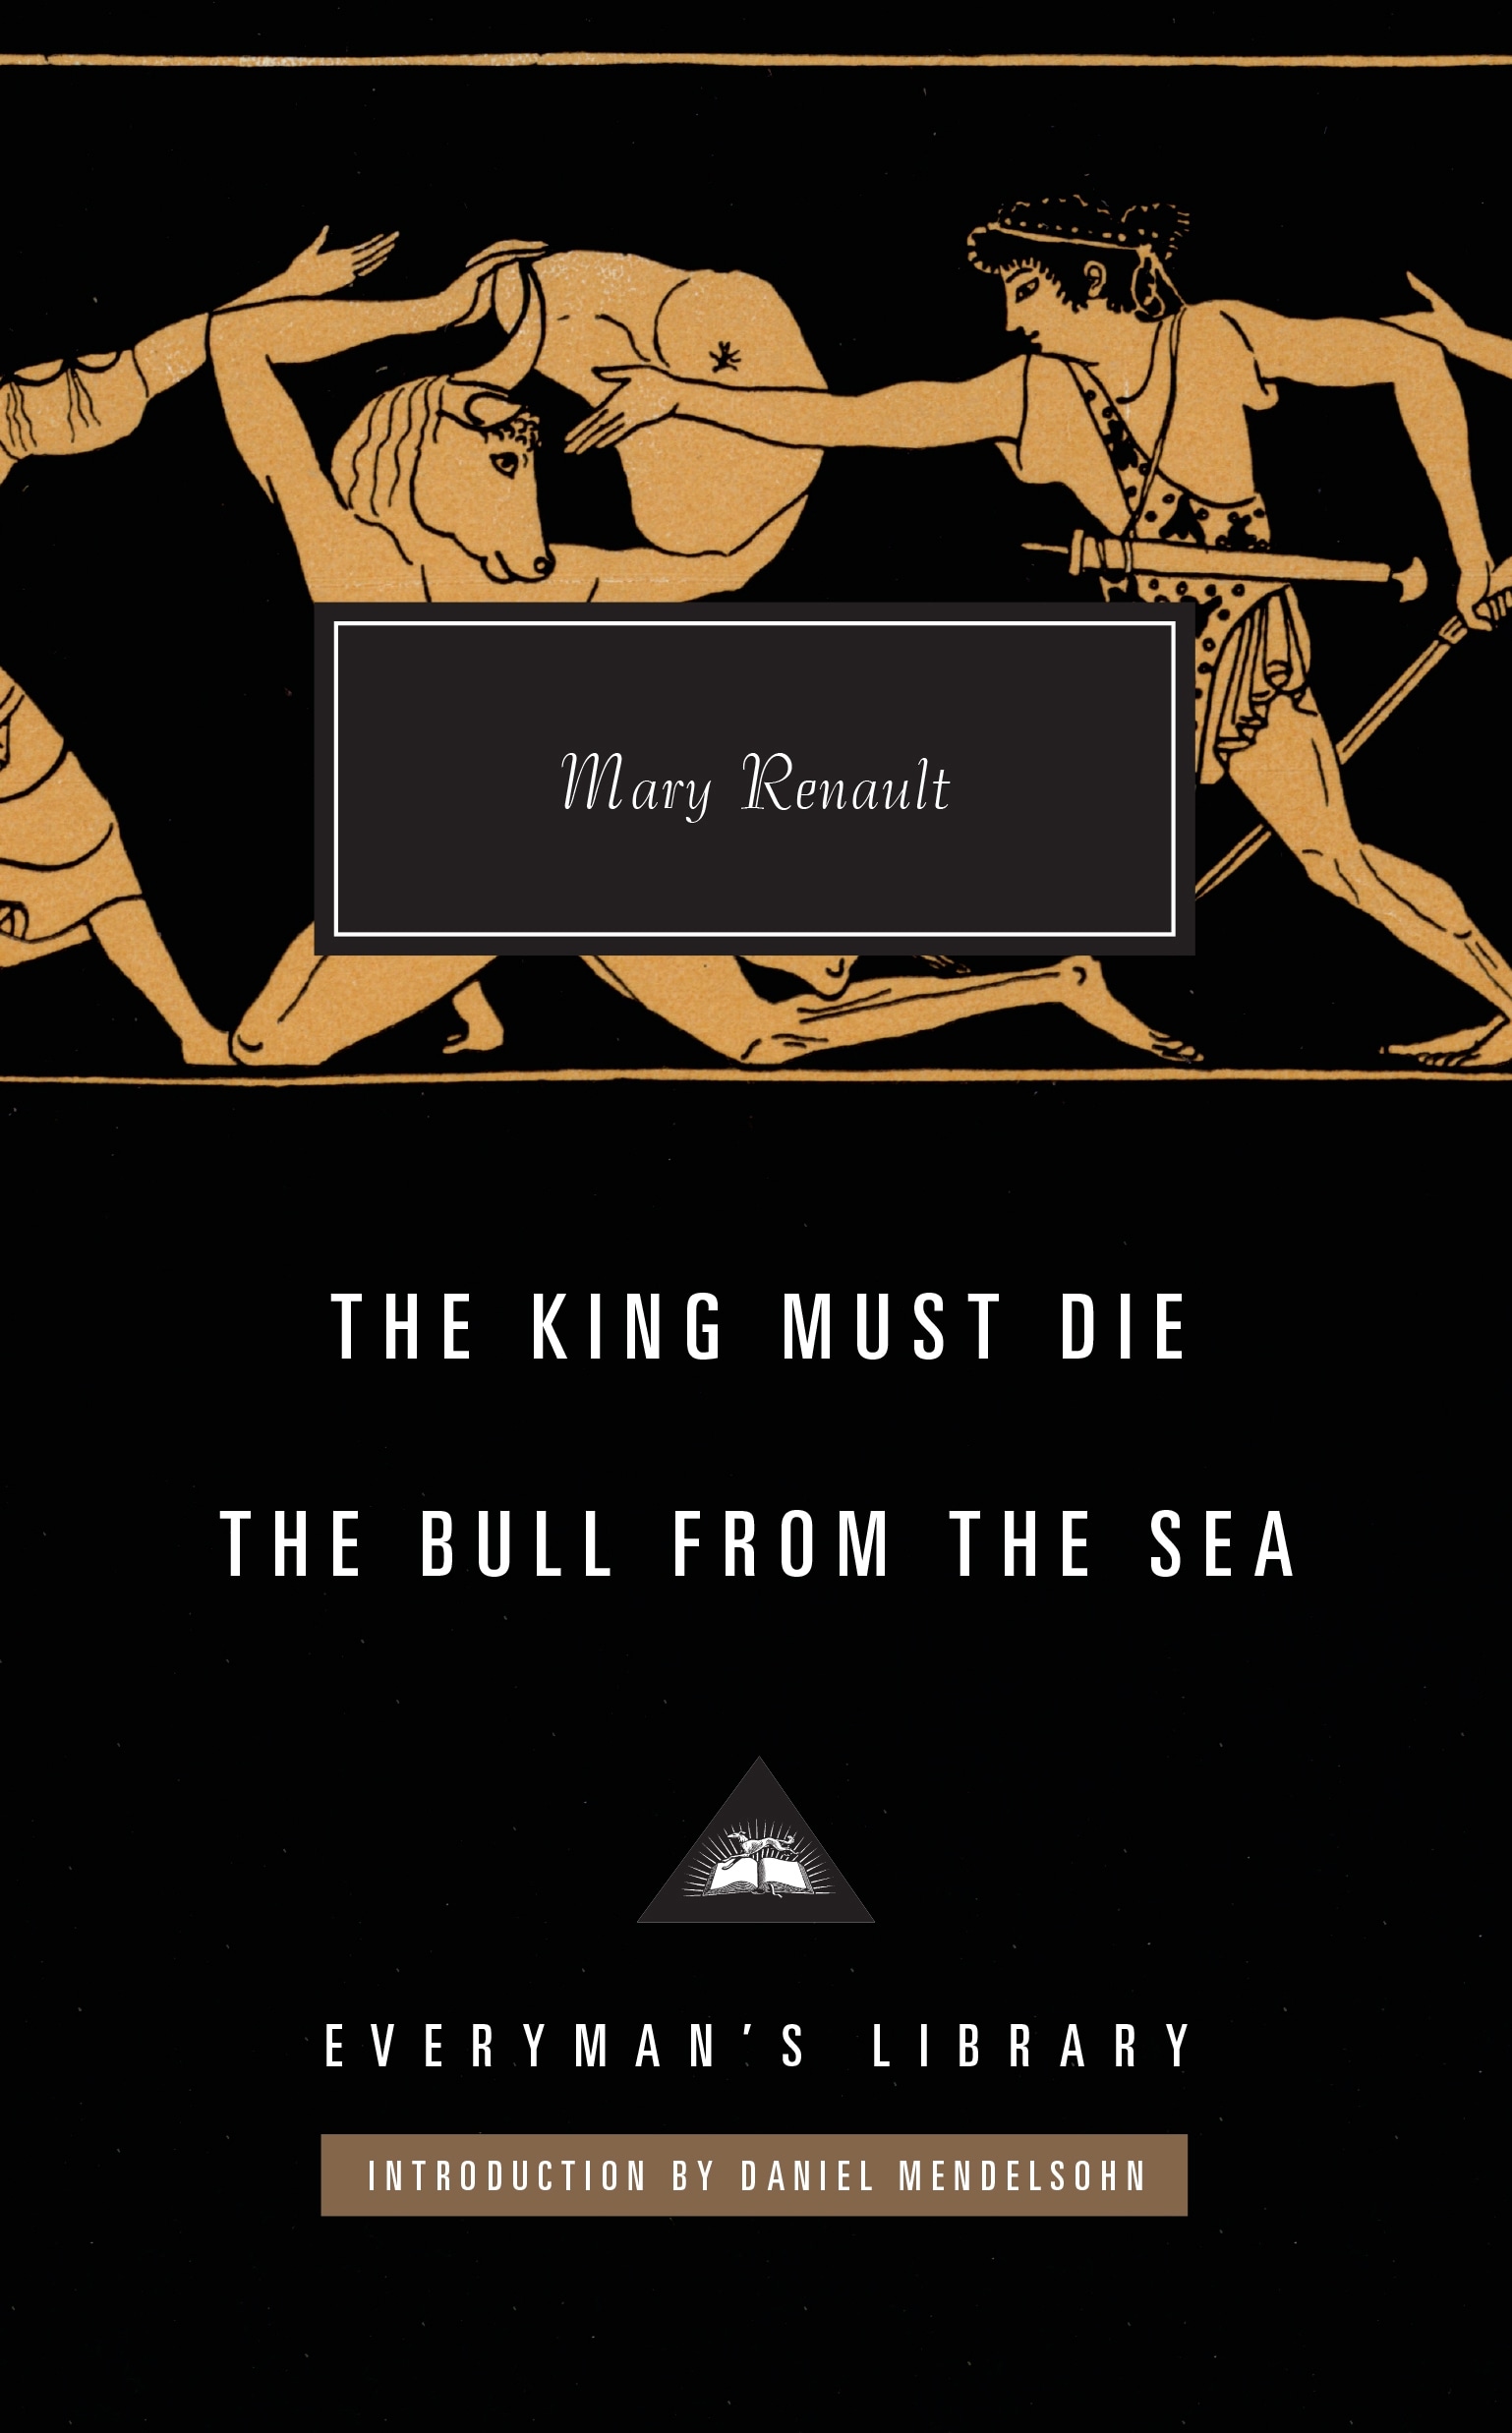 Book “The King Must Die / The Bull from the Sea” by Mary Renault, Daniel Mendelsohn — October 6, 2022